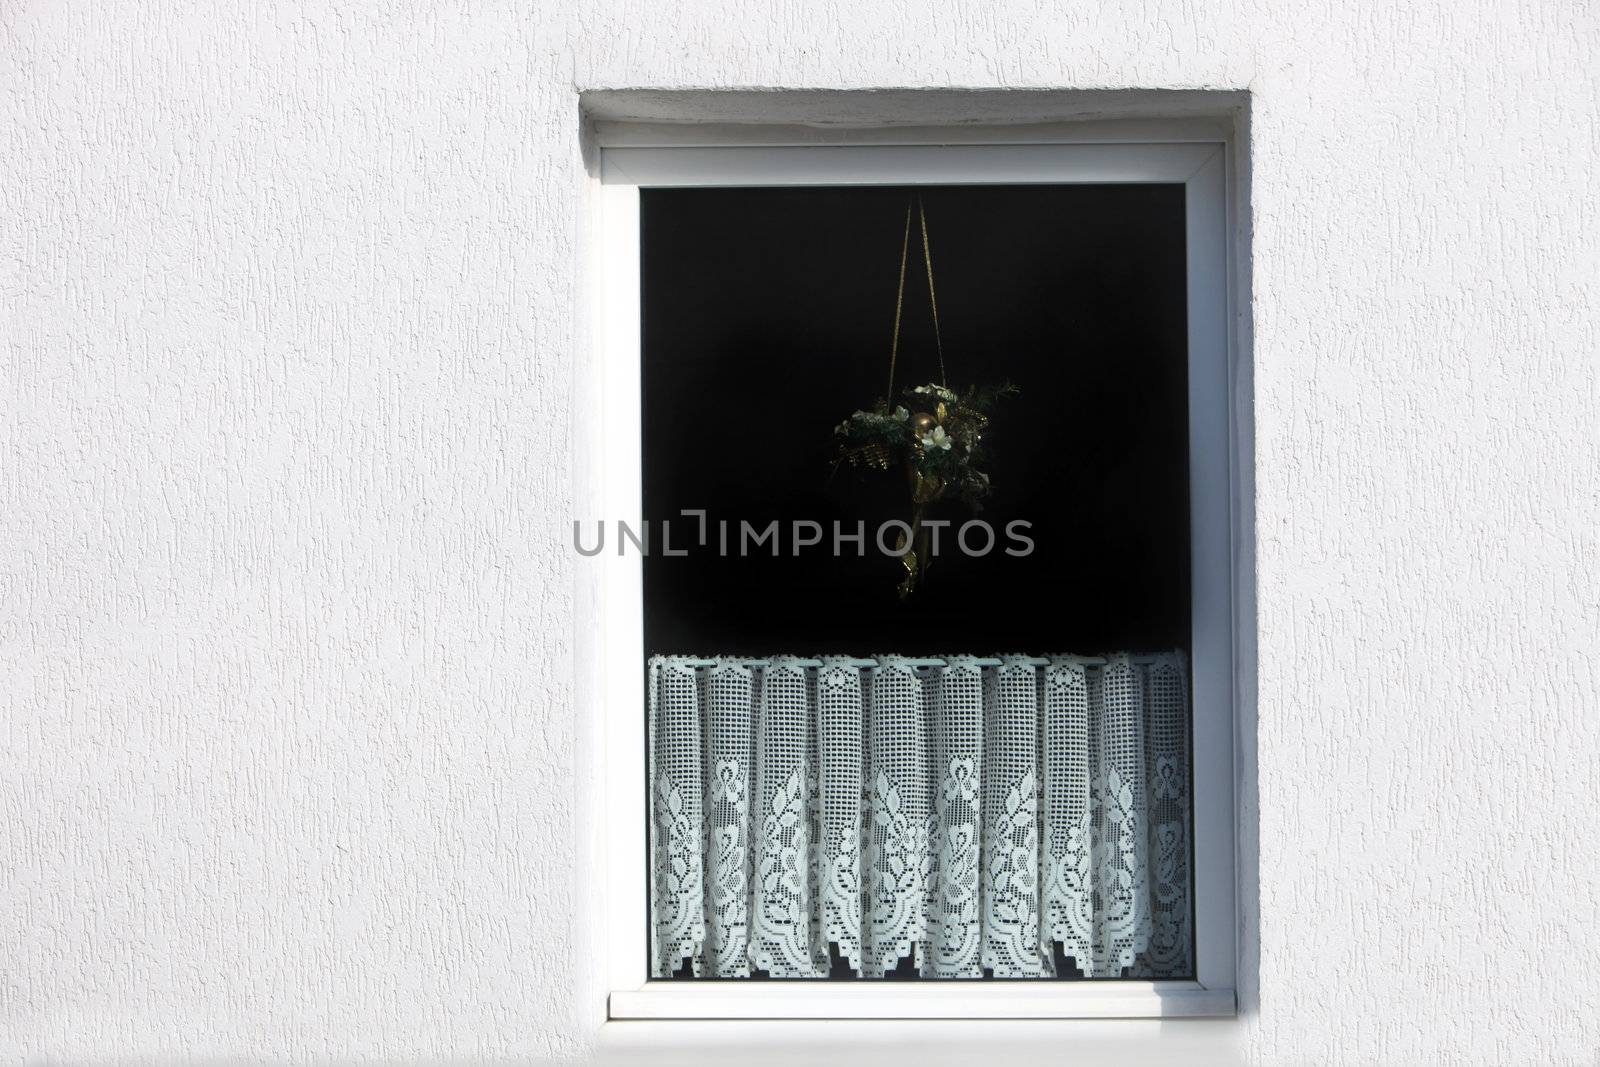 Outside view of a window in a white exterior wall of a house with a decorative net curtain on the lower half